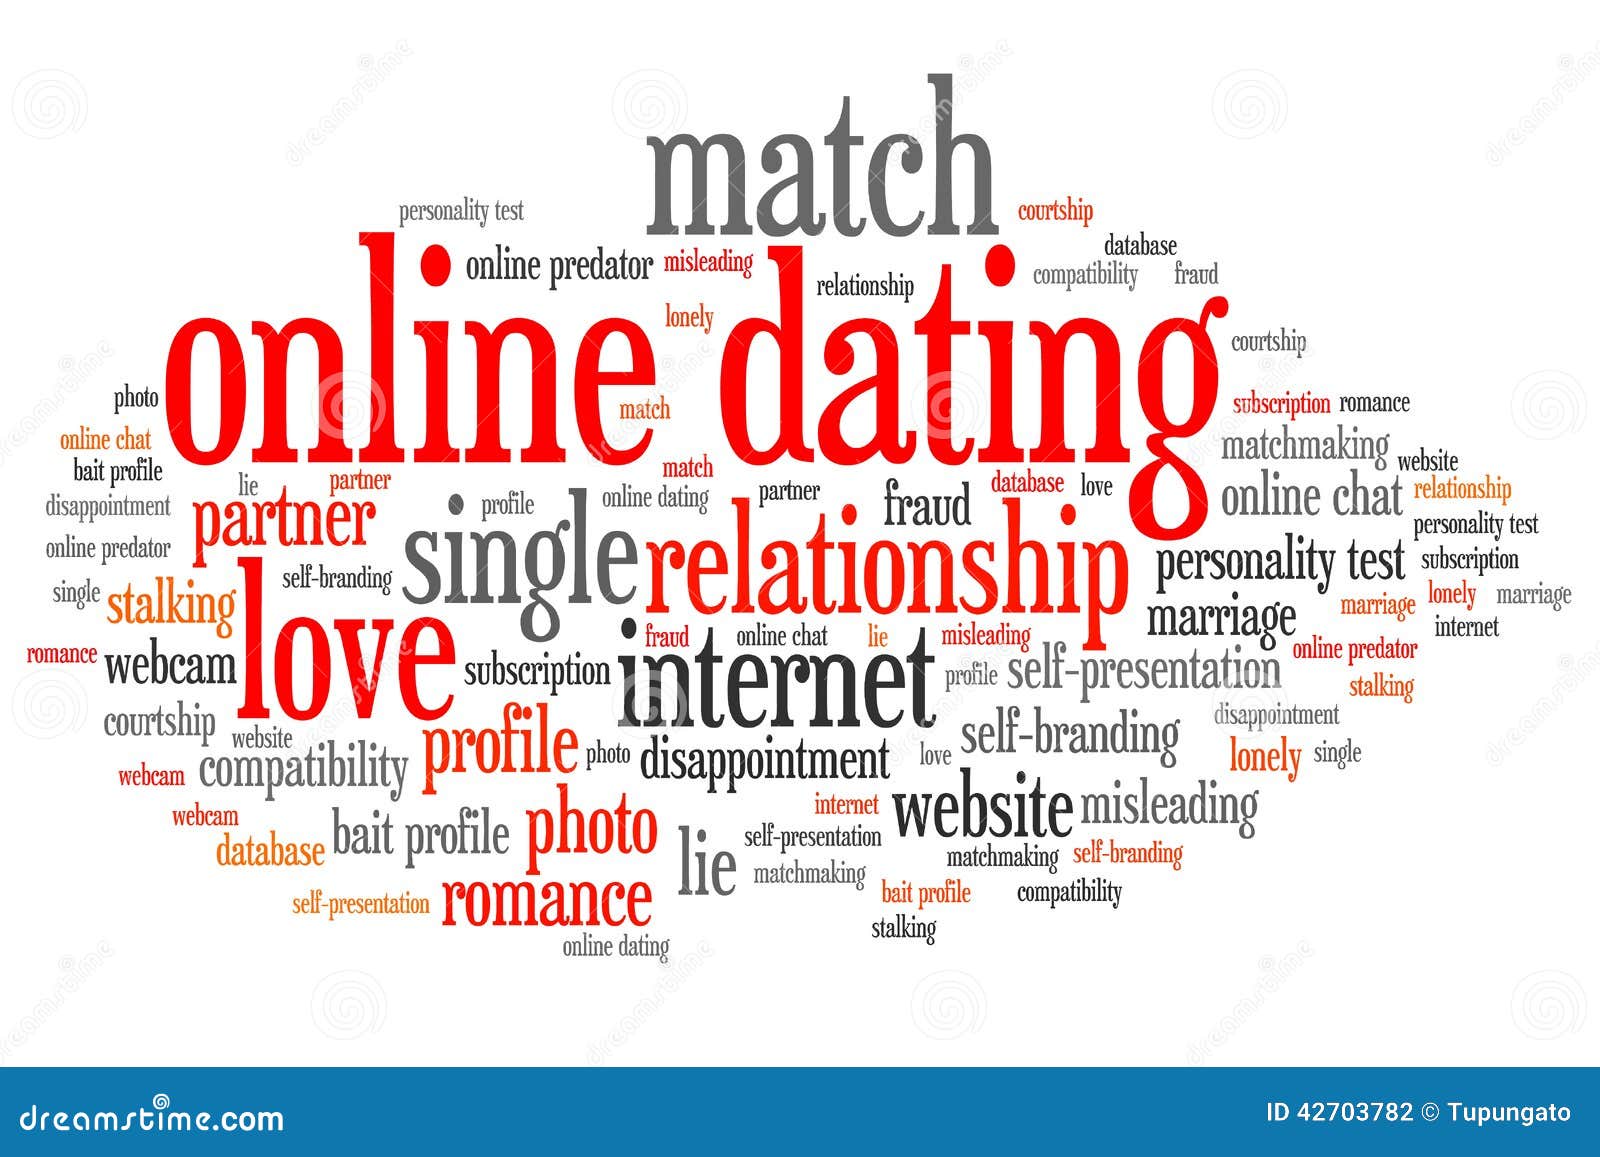 what is a good free dating website